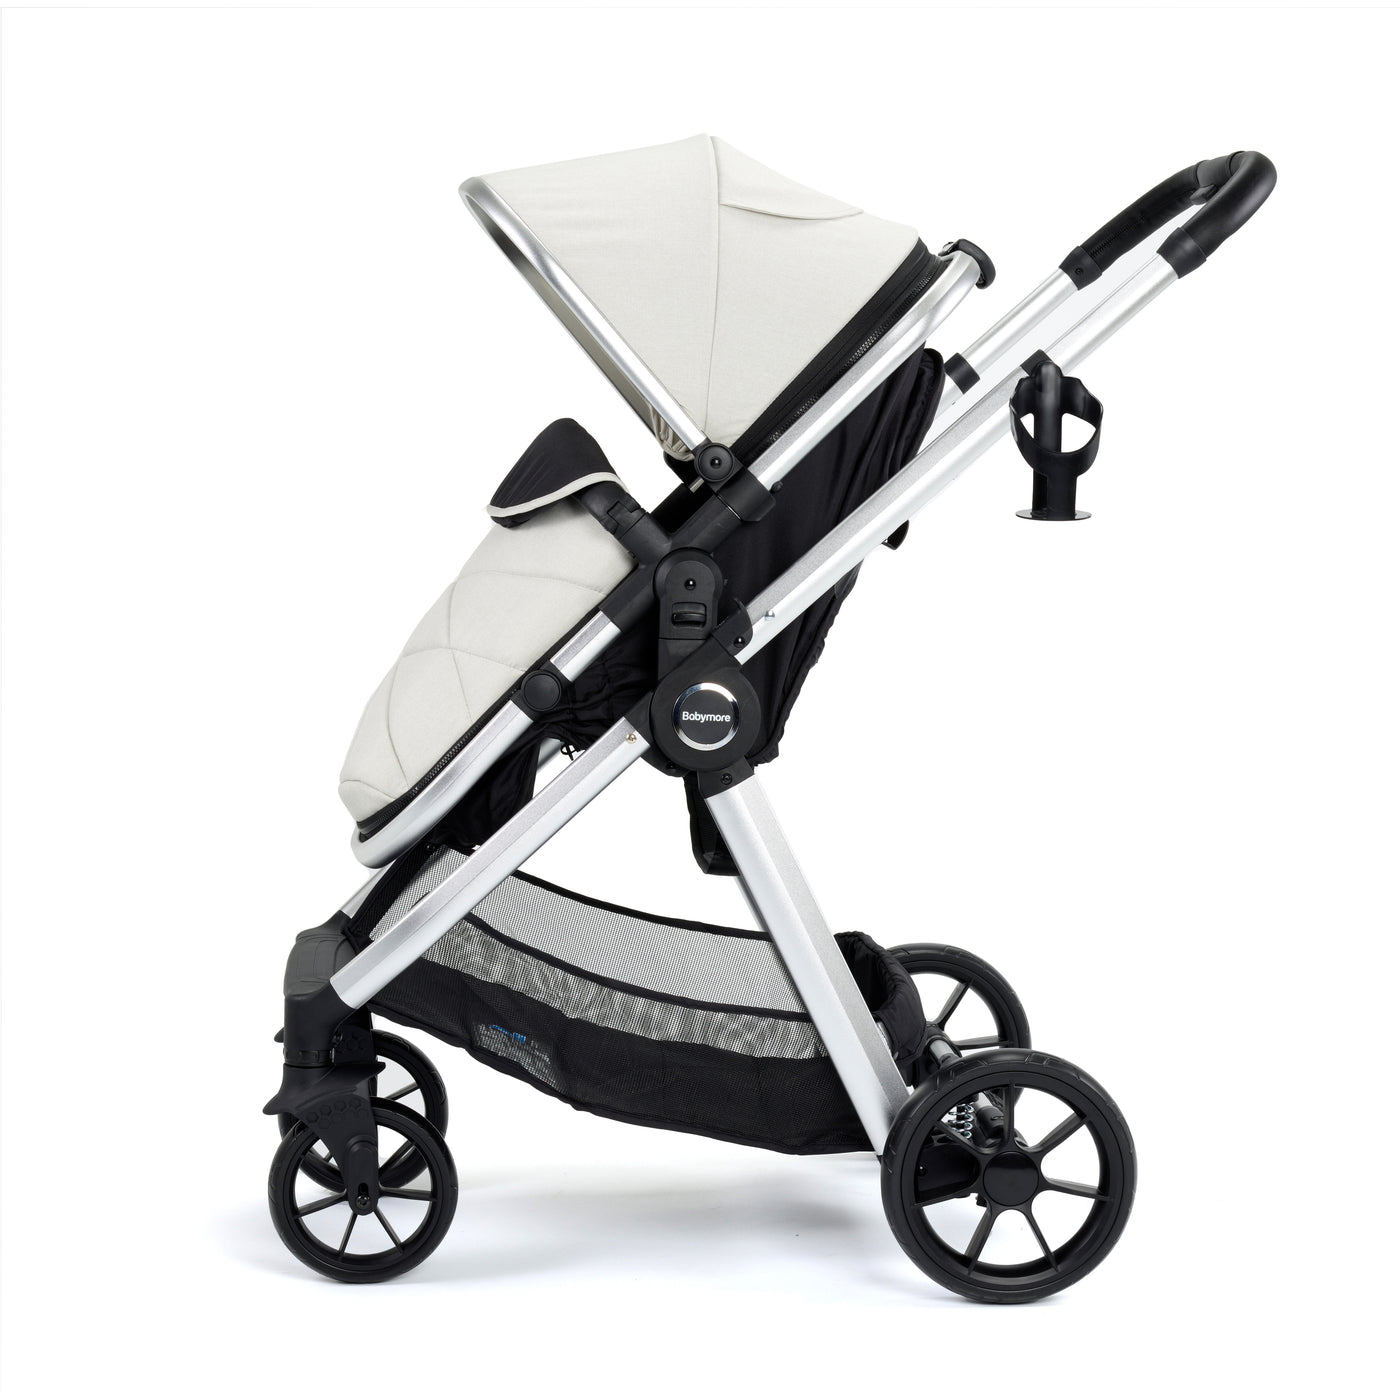 Mimi Travel System Coco I-Size Care Seat with Isofix Base